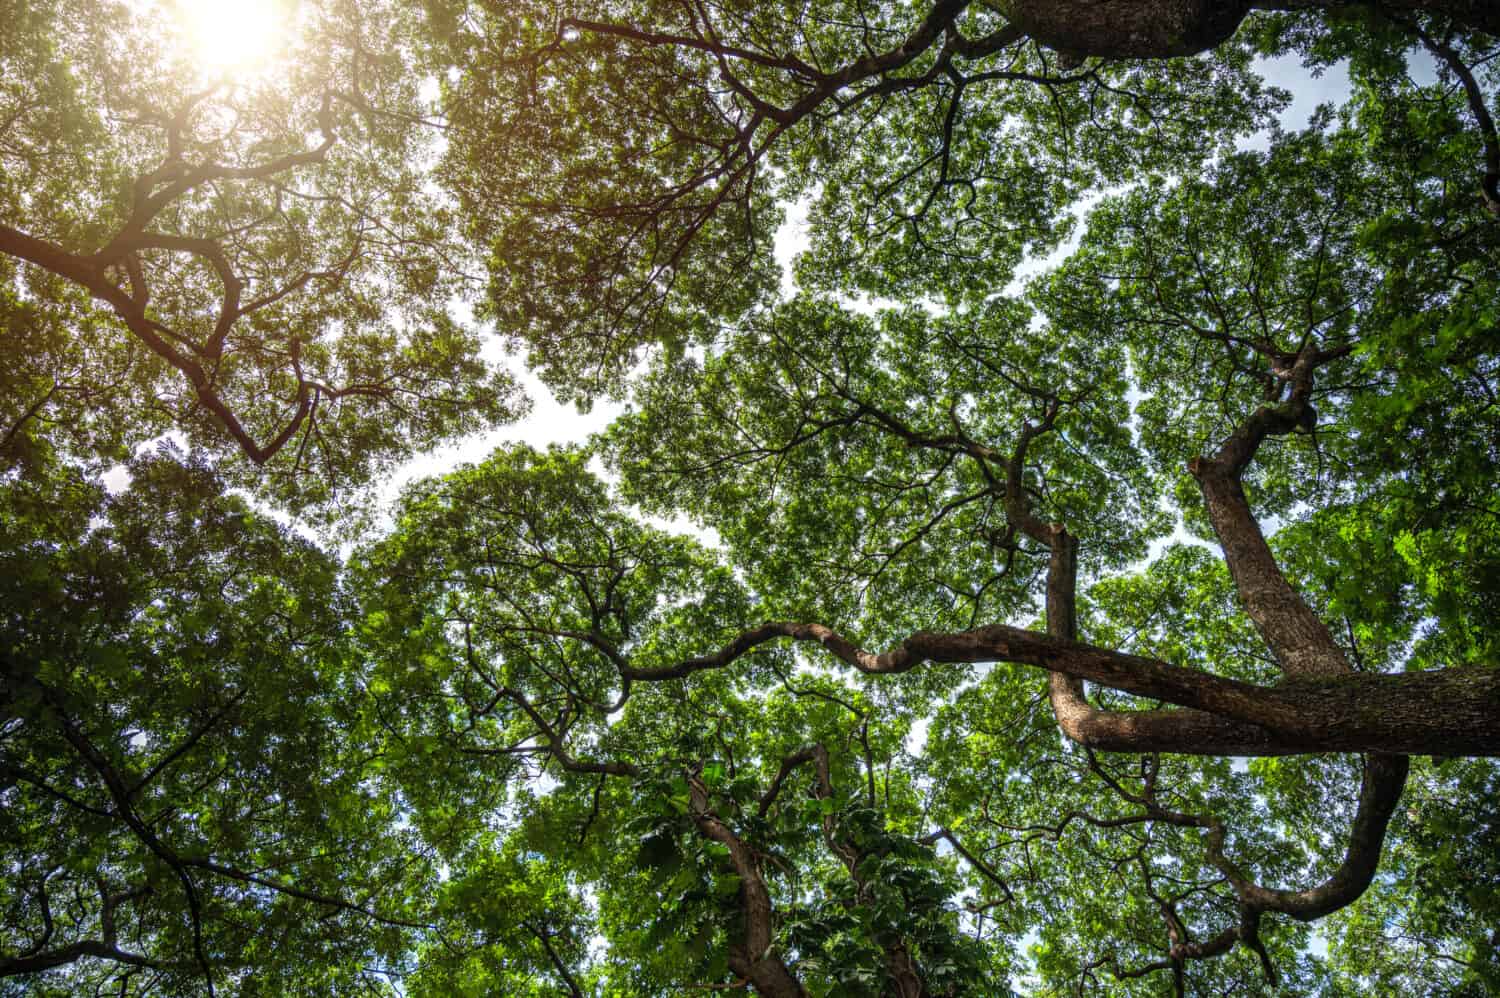 Crown shyness: what it is and which trees it affects - Discover Wildlife